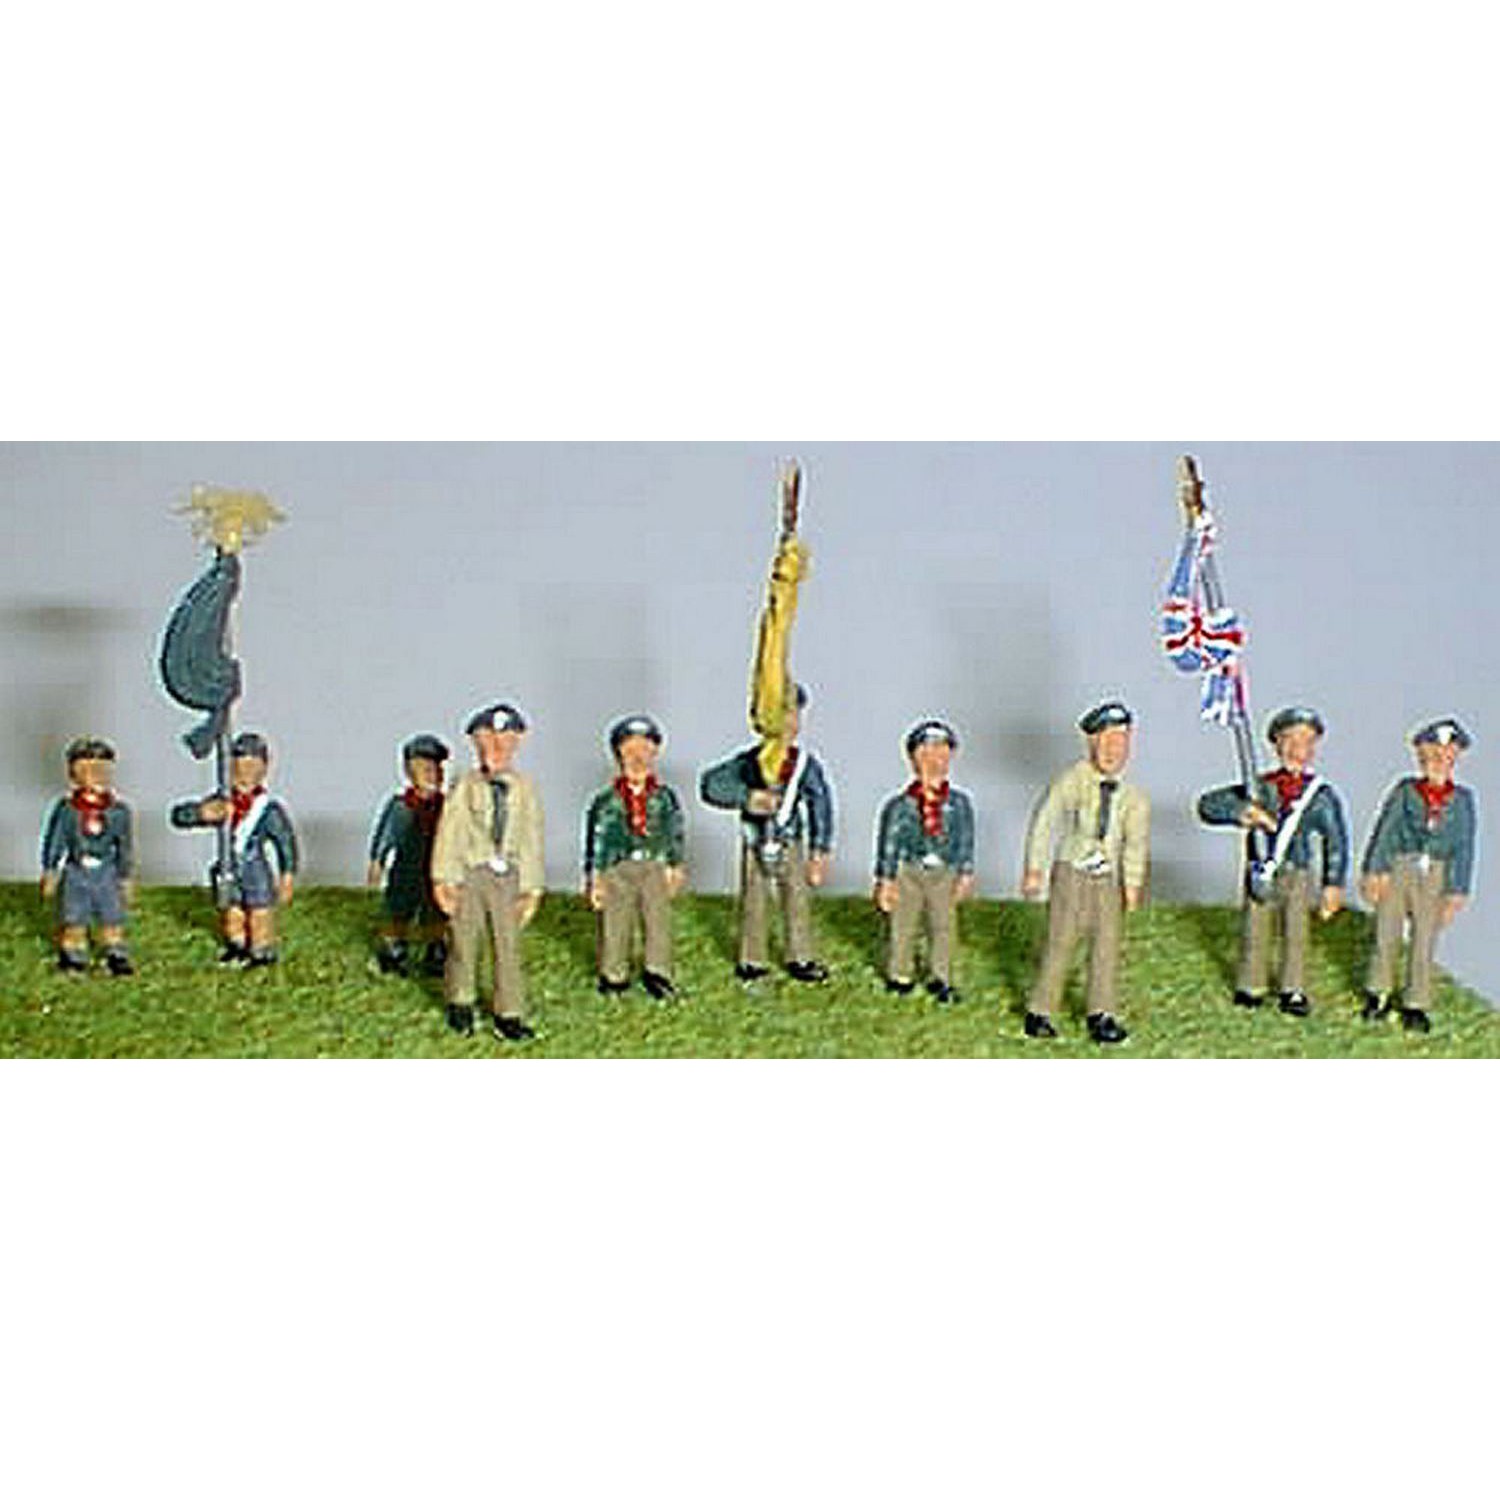 Scouts Flag Bearers OO Scale UNPAINTED Kit F197a Langley Models 1960's Cubs